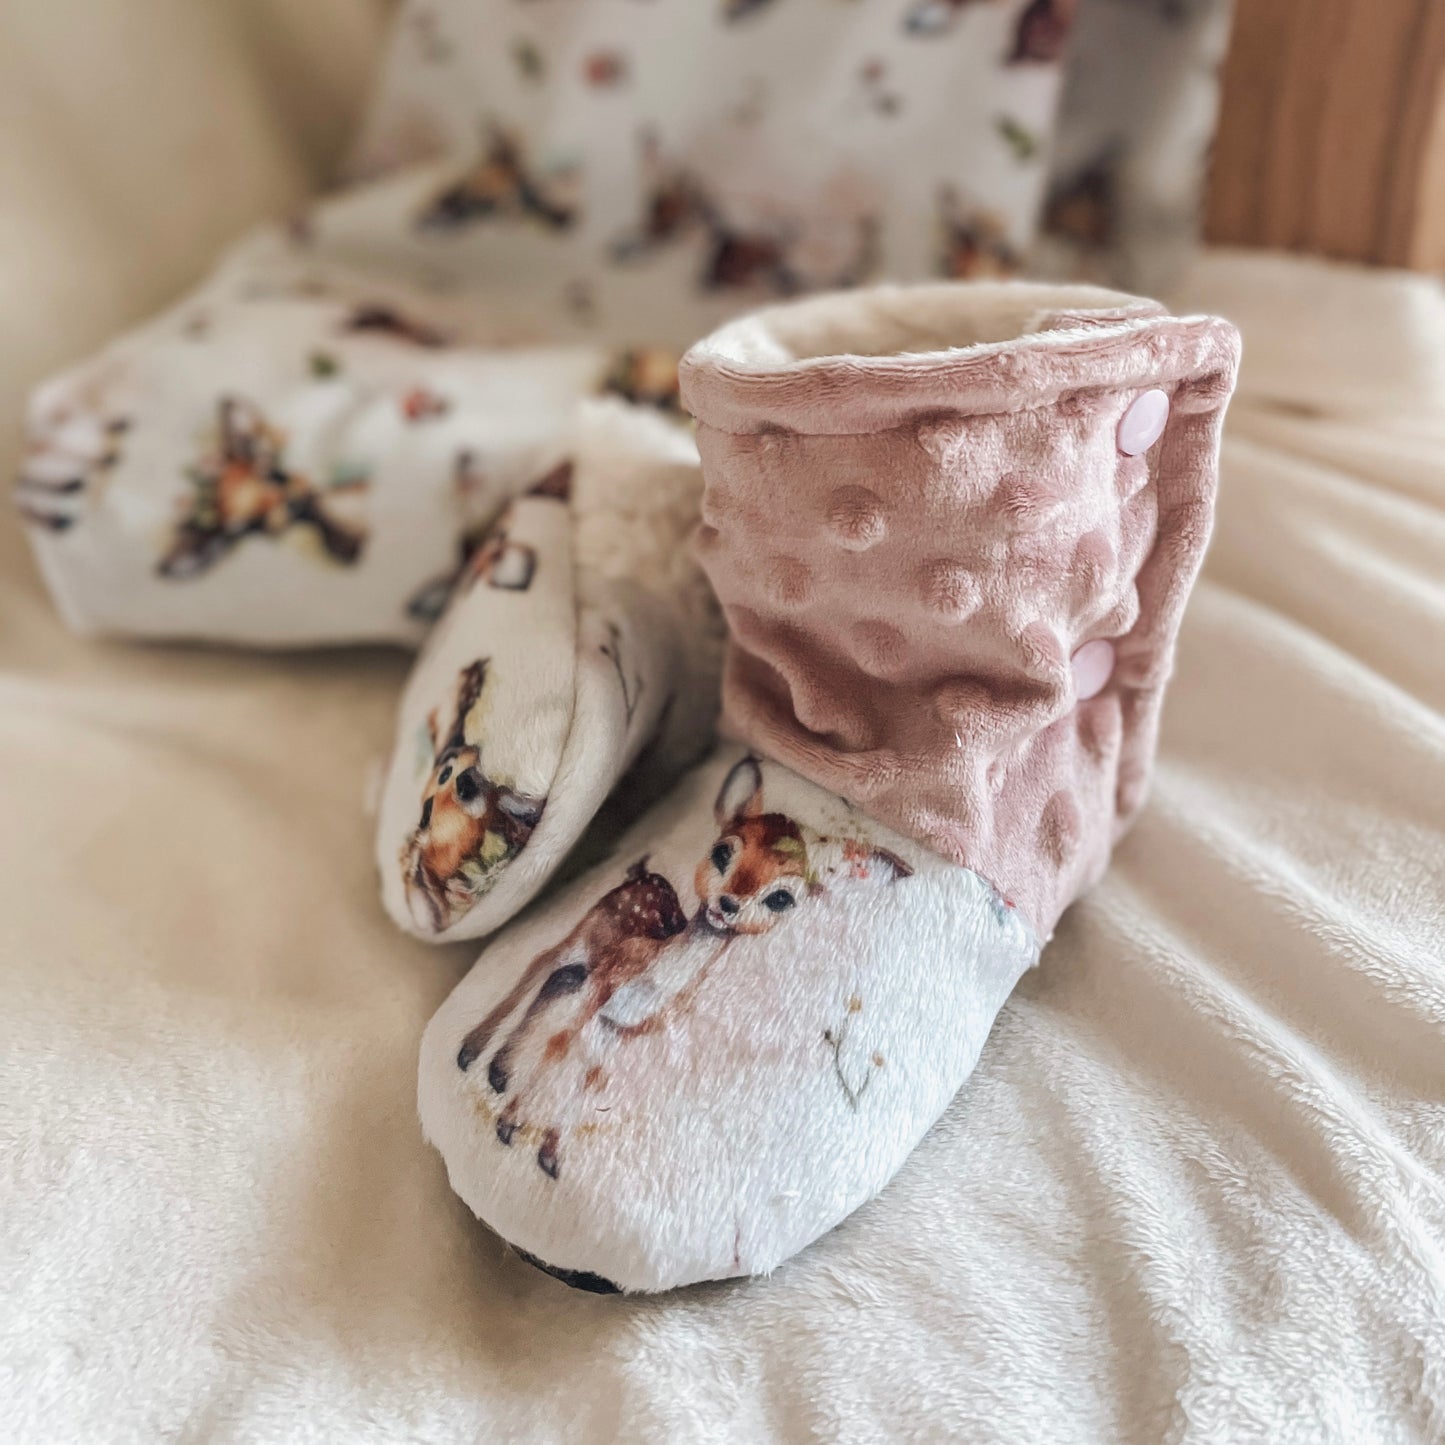 Soft and warm slippers "Dear love/rosewater dot" On command